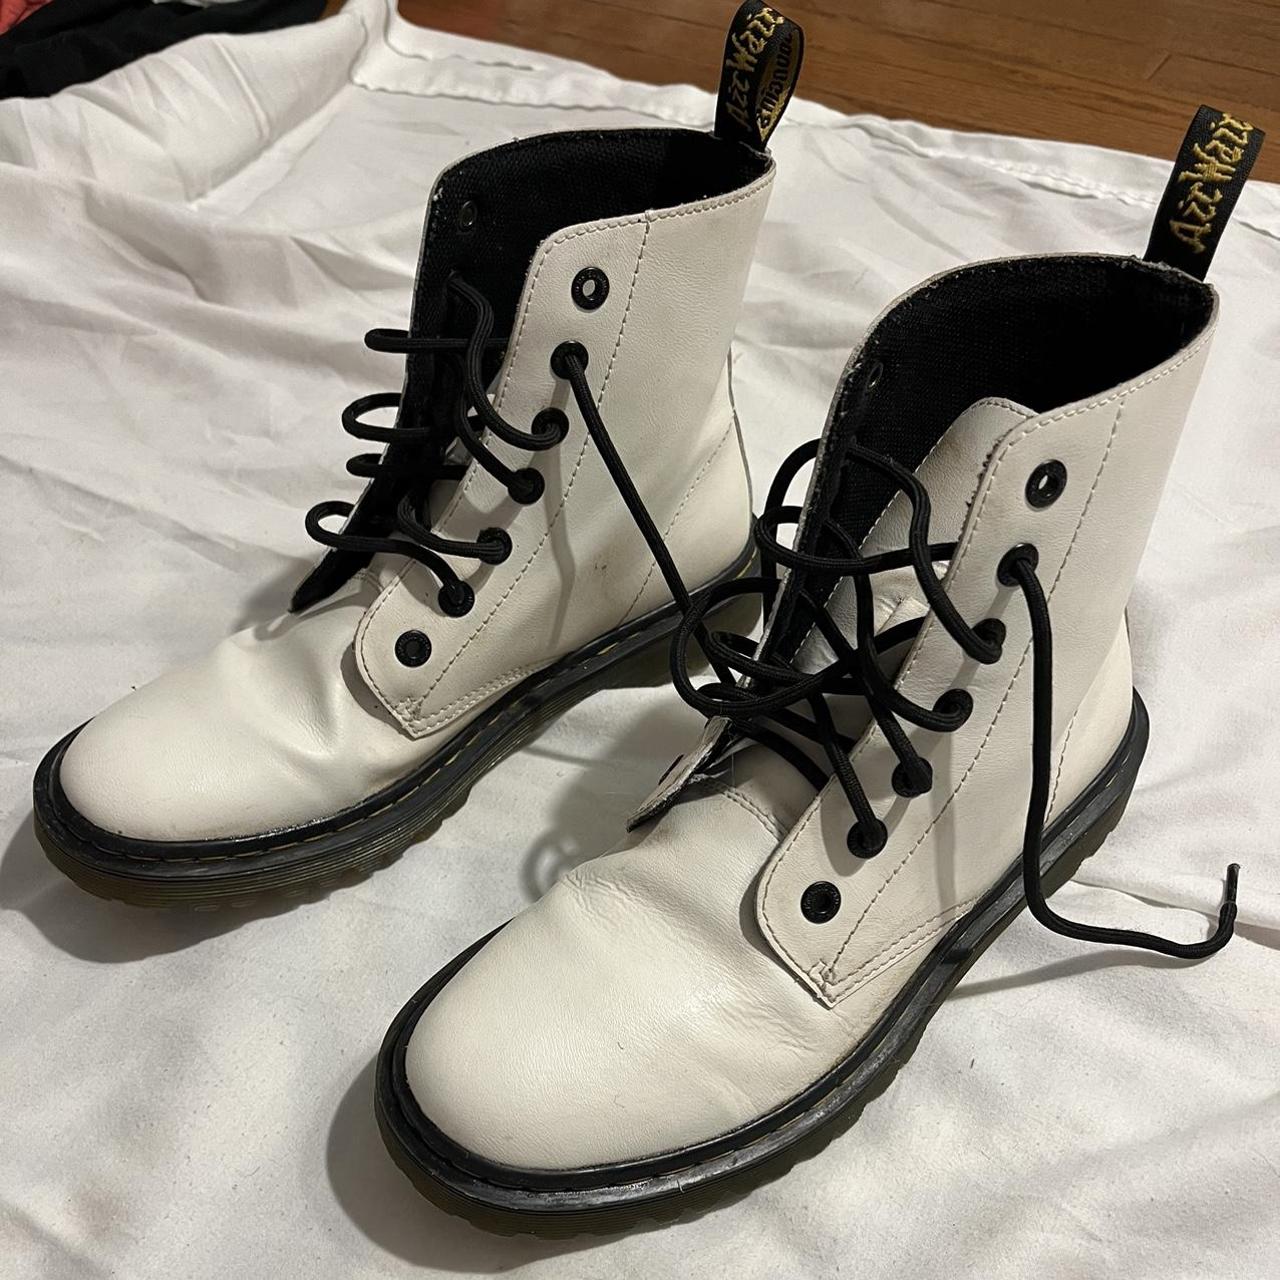 Dr. Martens Women's White and Black Boots (3)